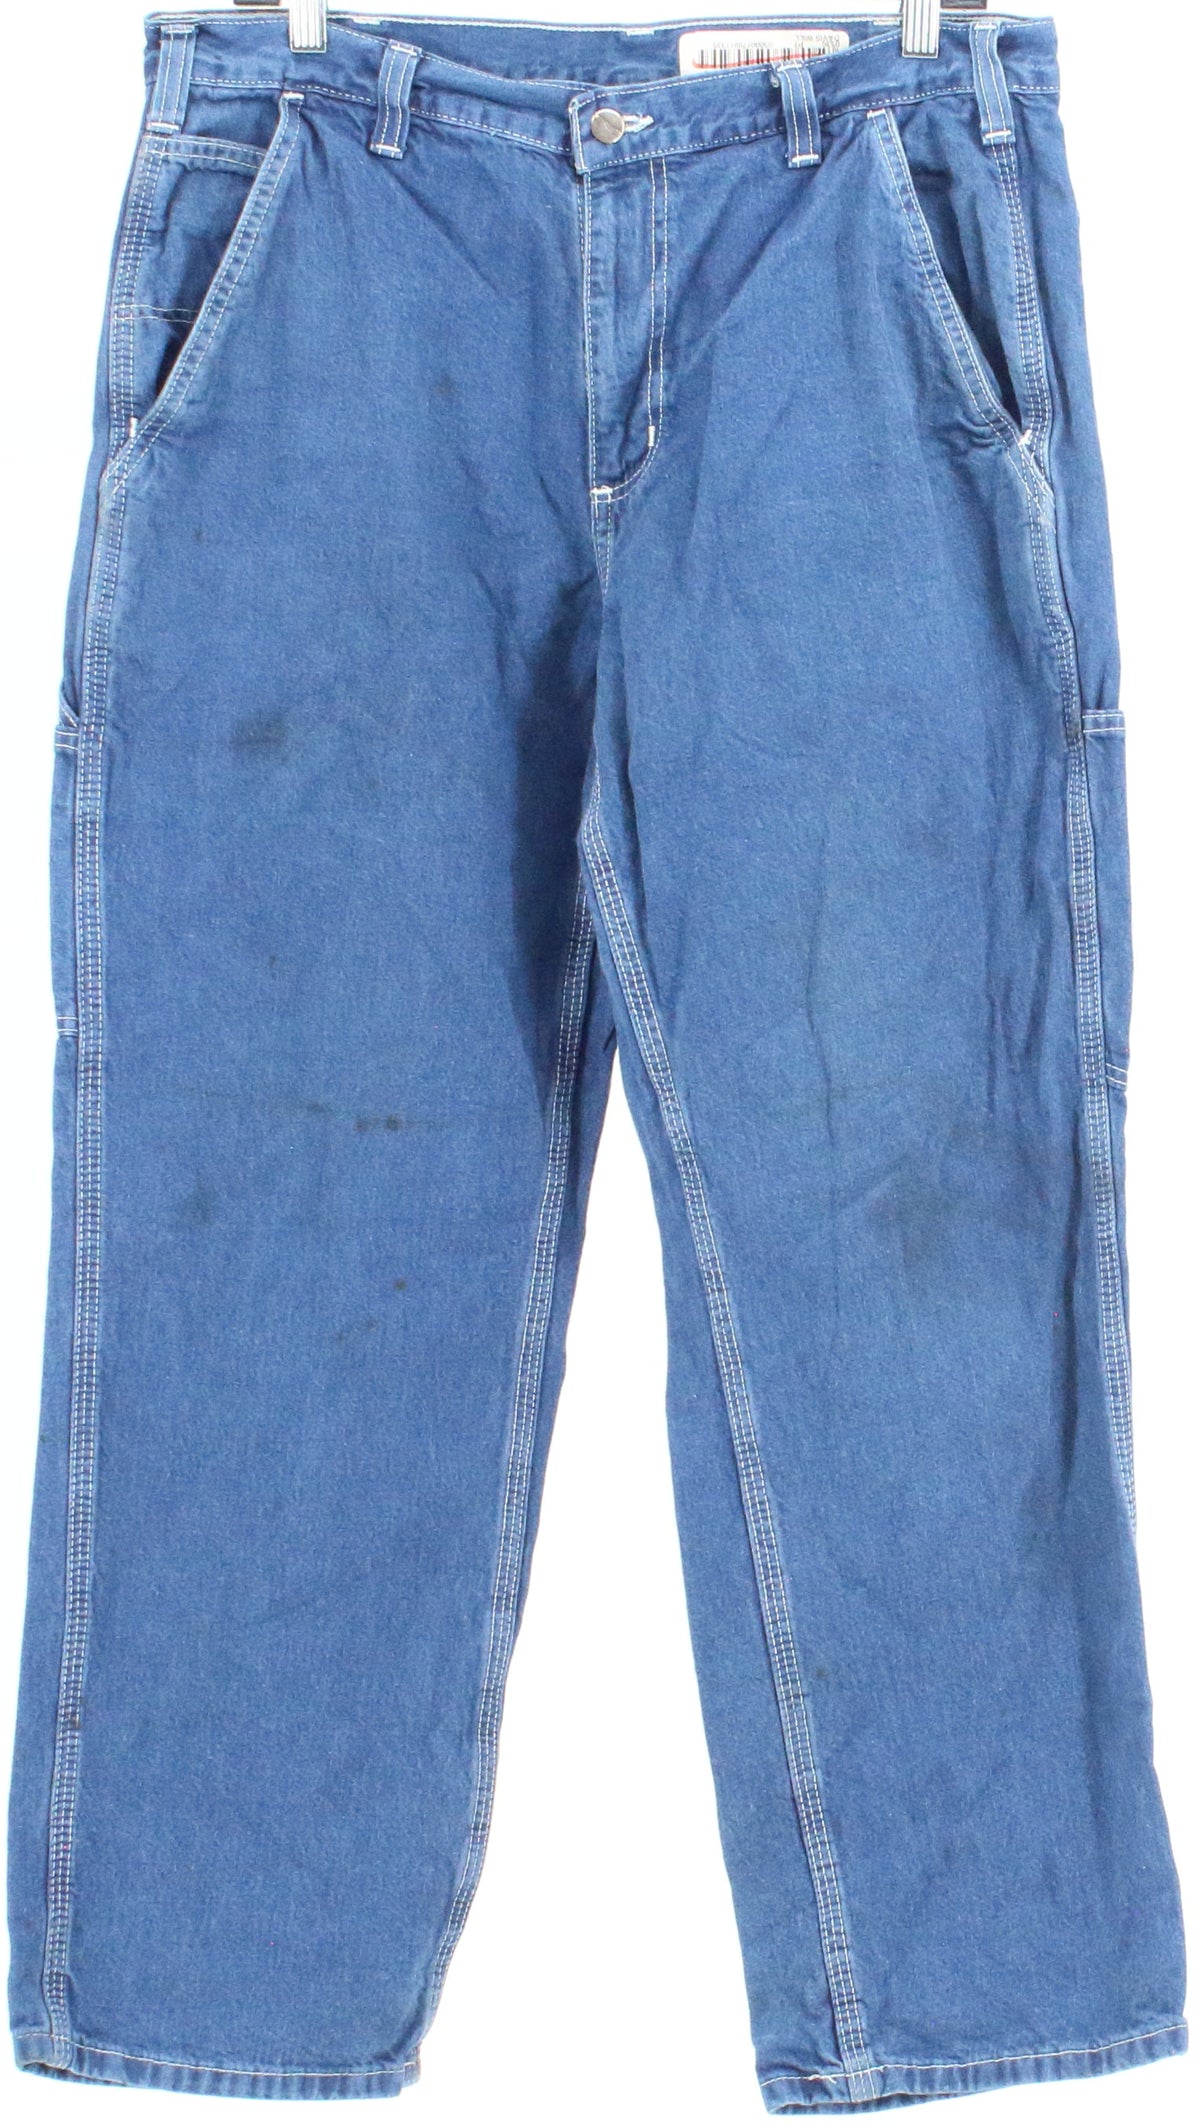 Carhartt Blue Wash Jeans Dungaree Fit Cargo Pants With White Topstitch